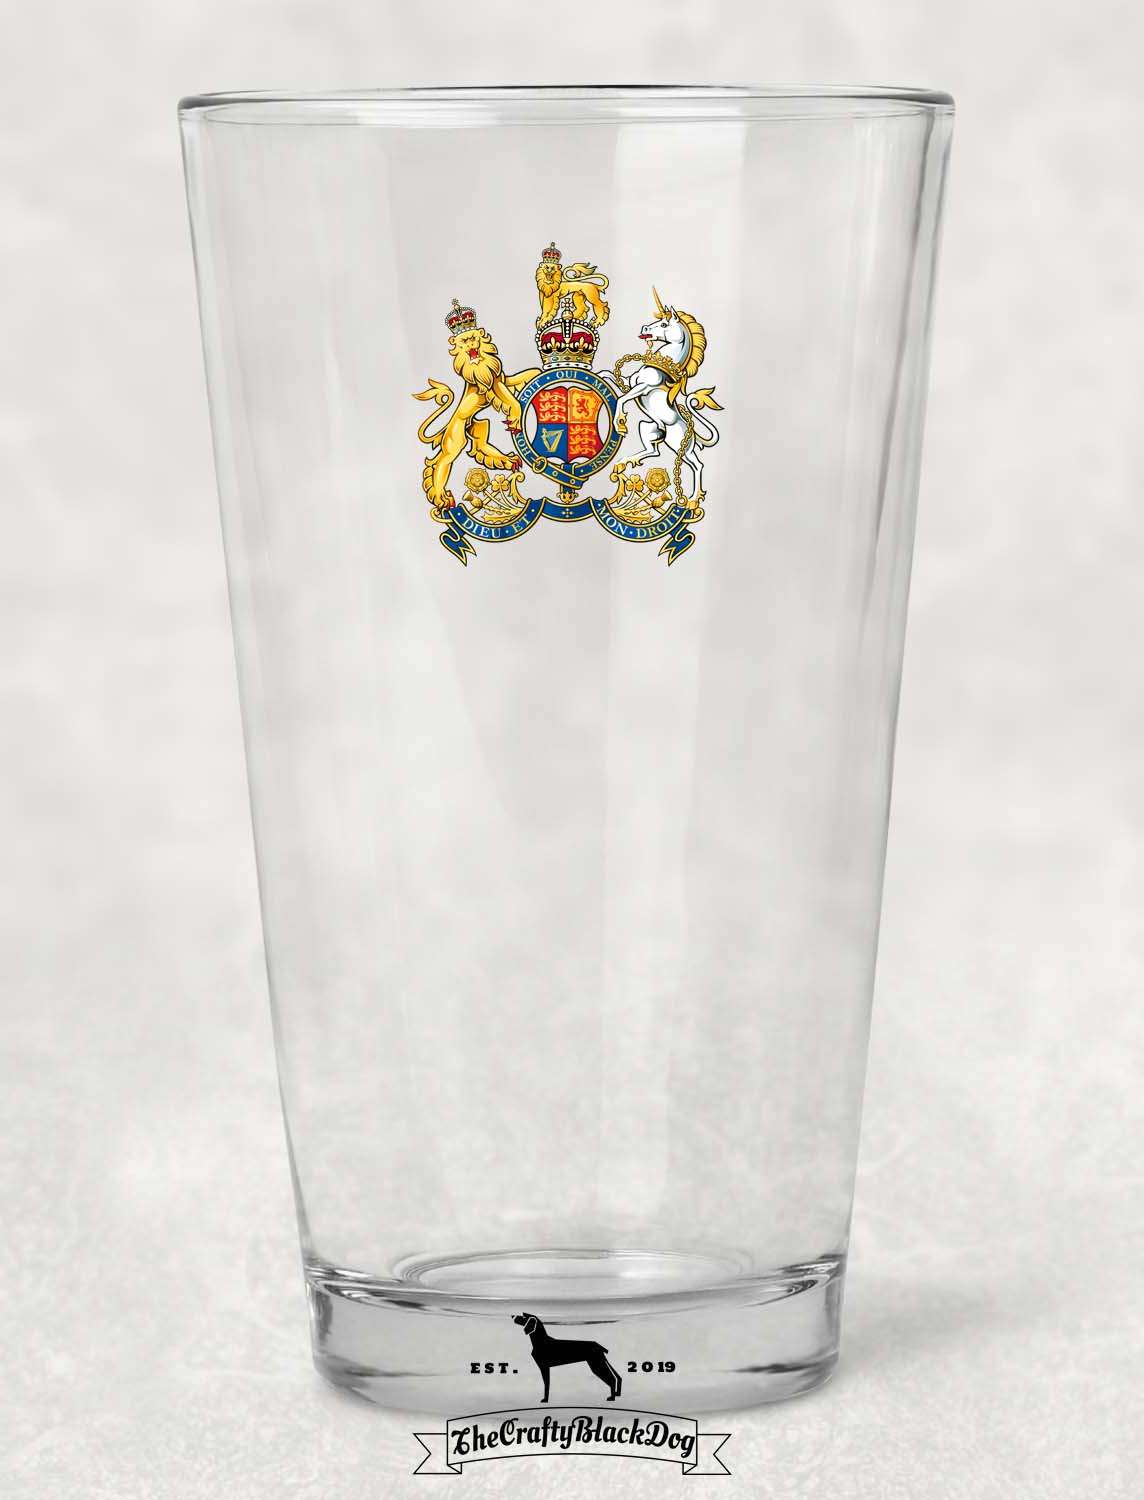 General Service Corps - Pint Glass (New King's Crown)